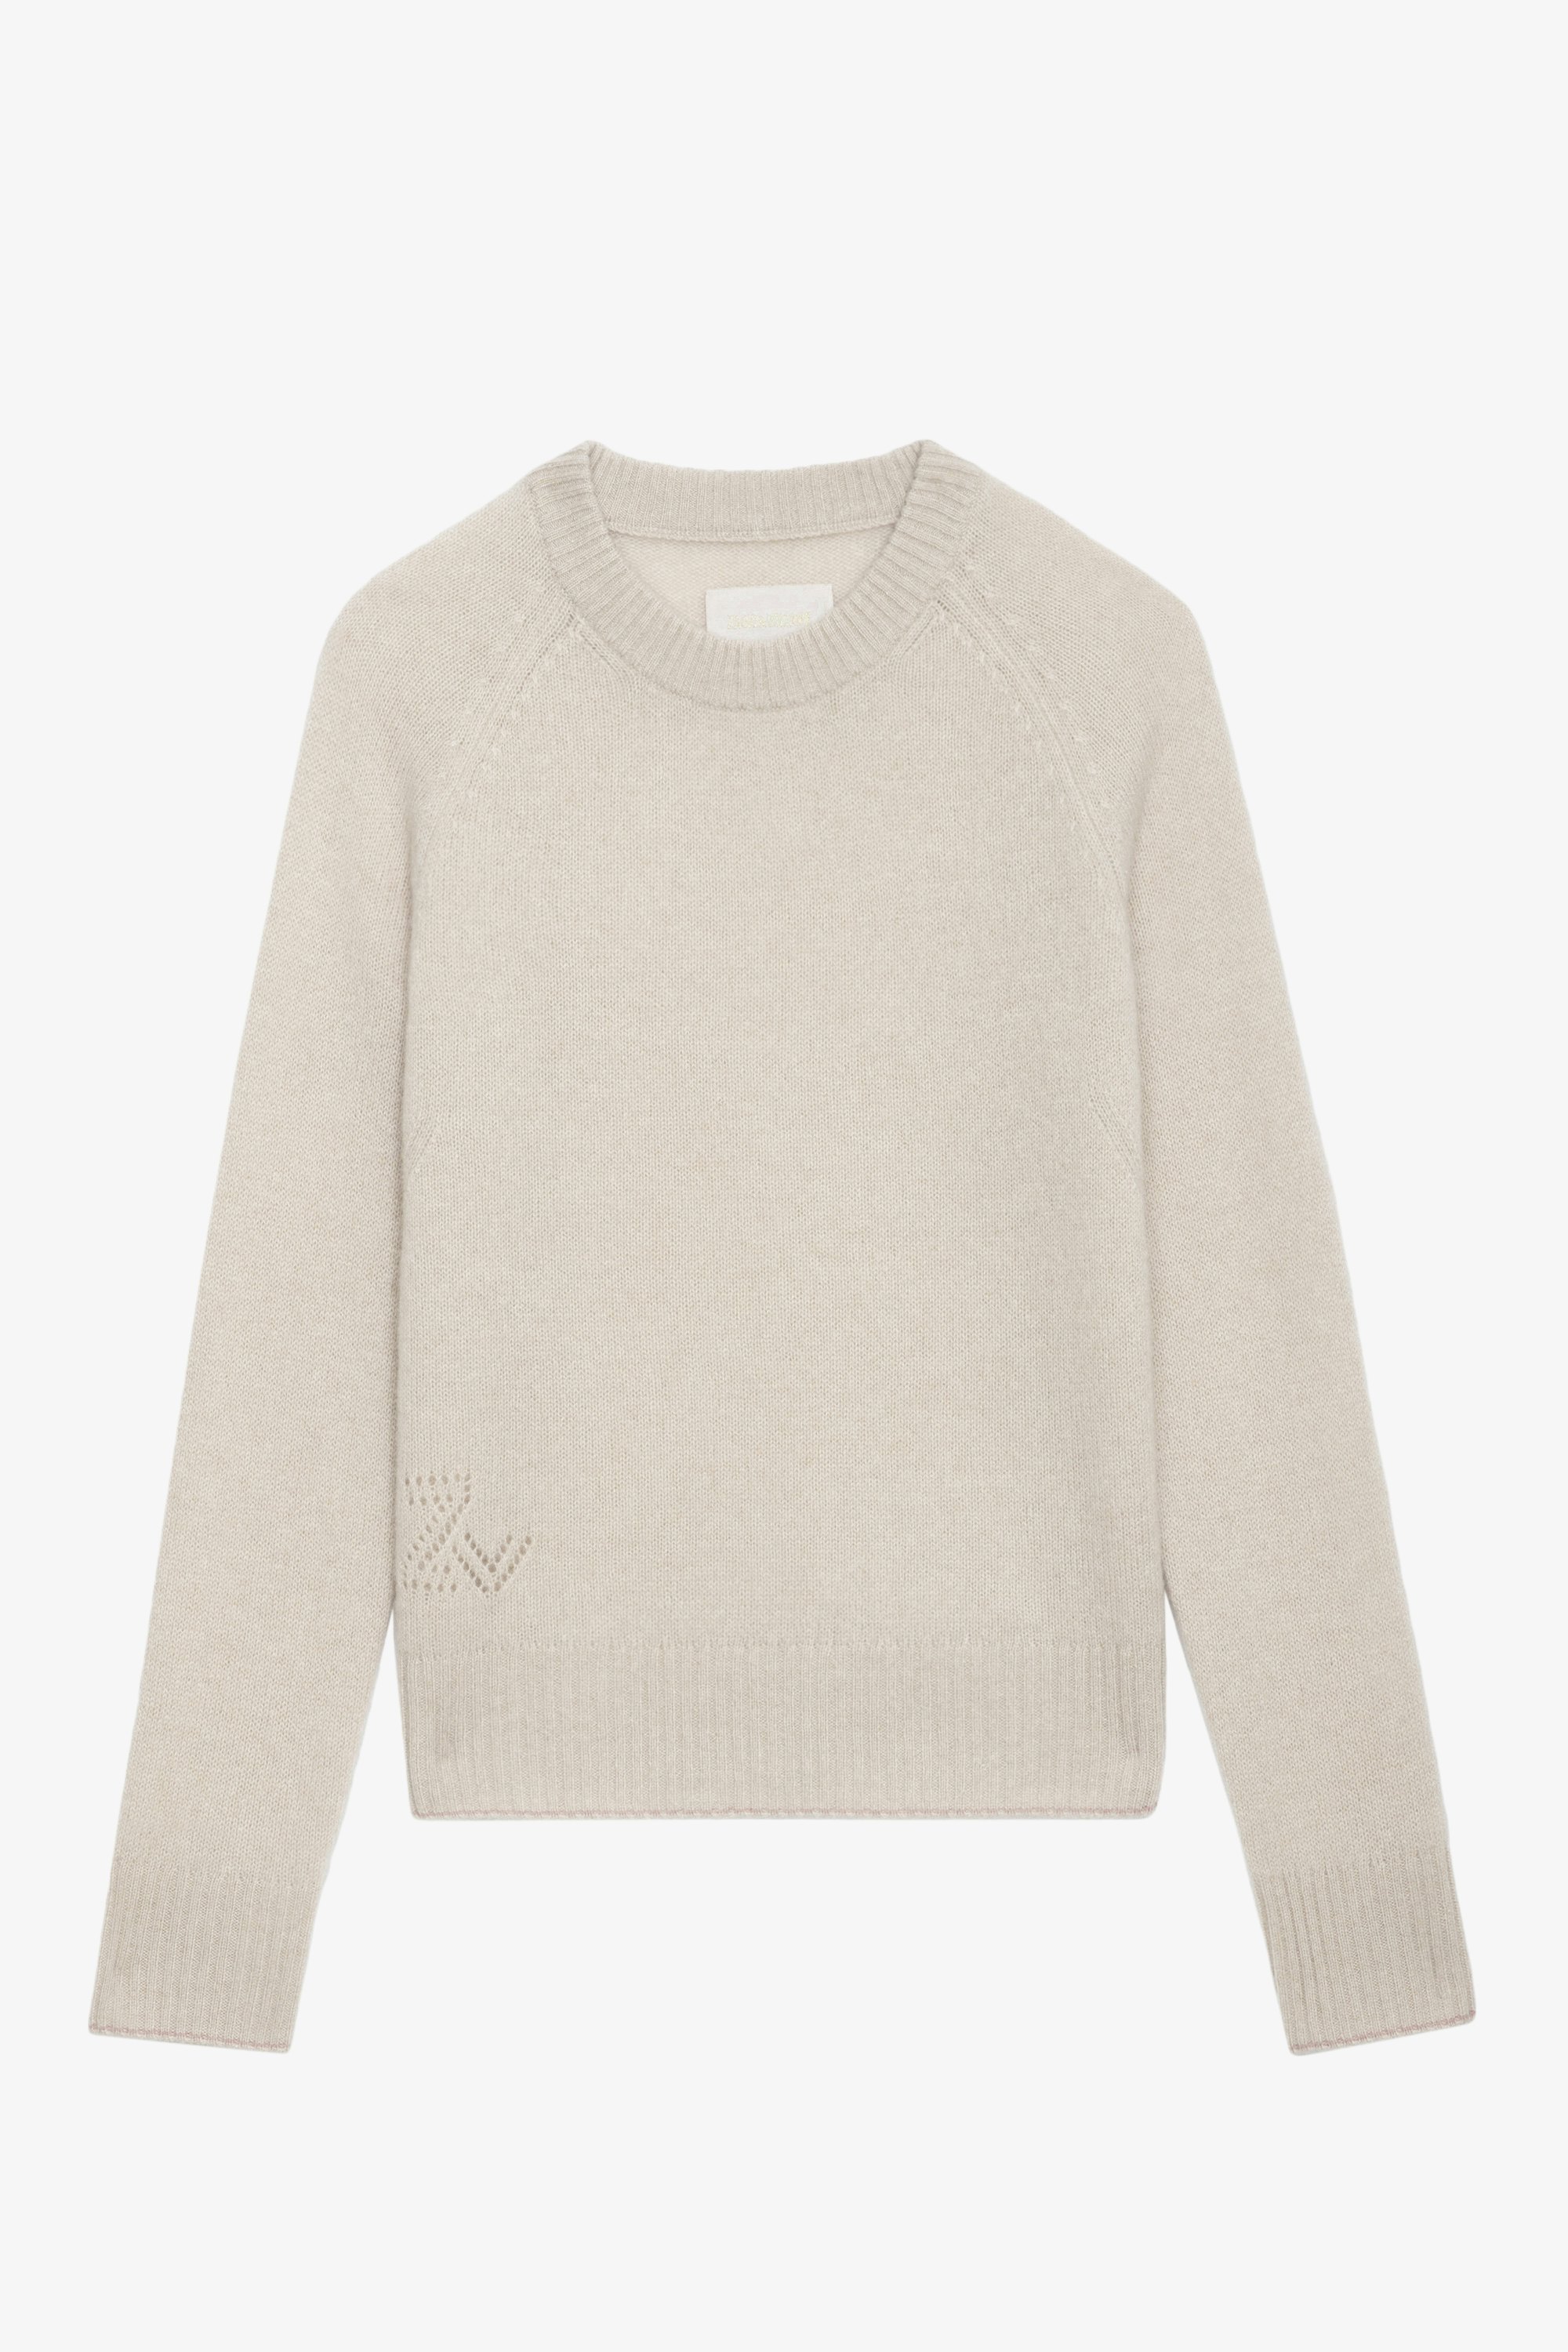 Sourcy Cashmere Sweater - Beige cashmere sweater with round neckline and long sleeves.